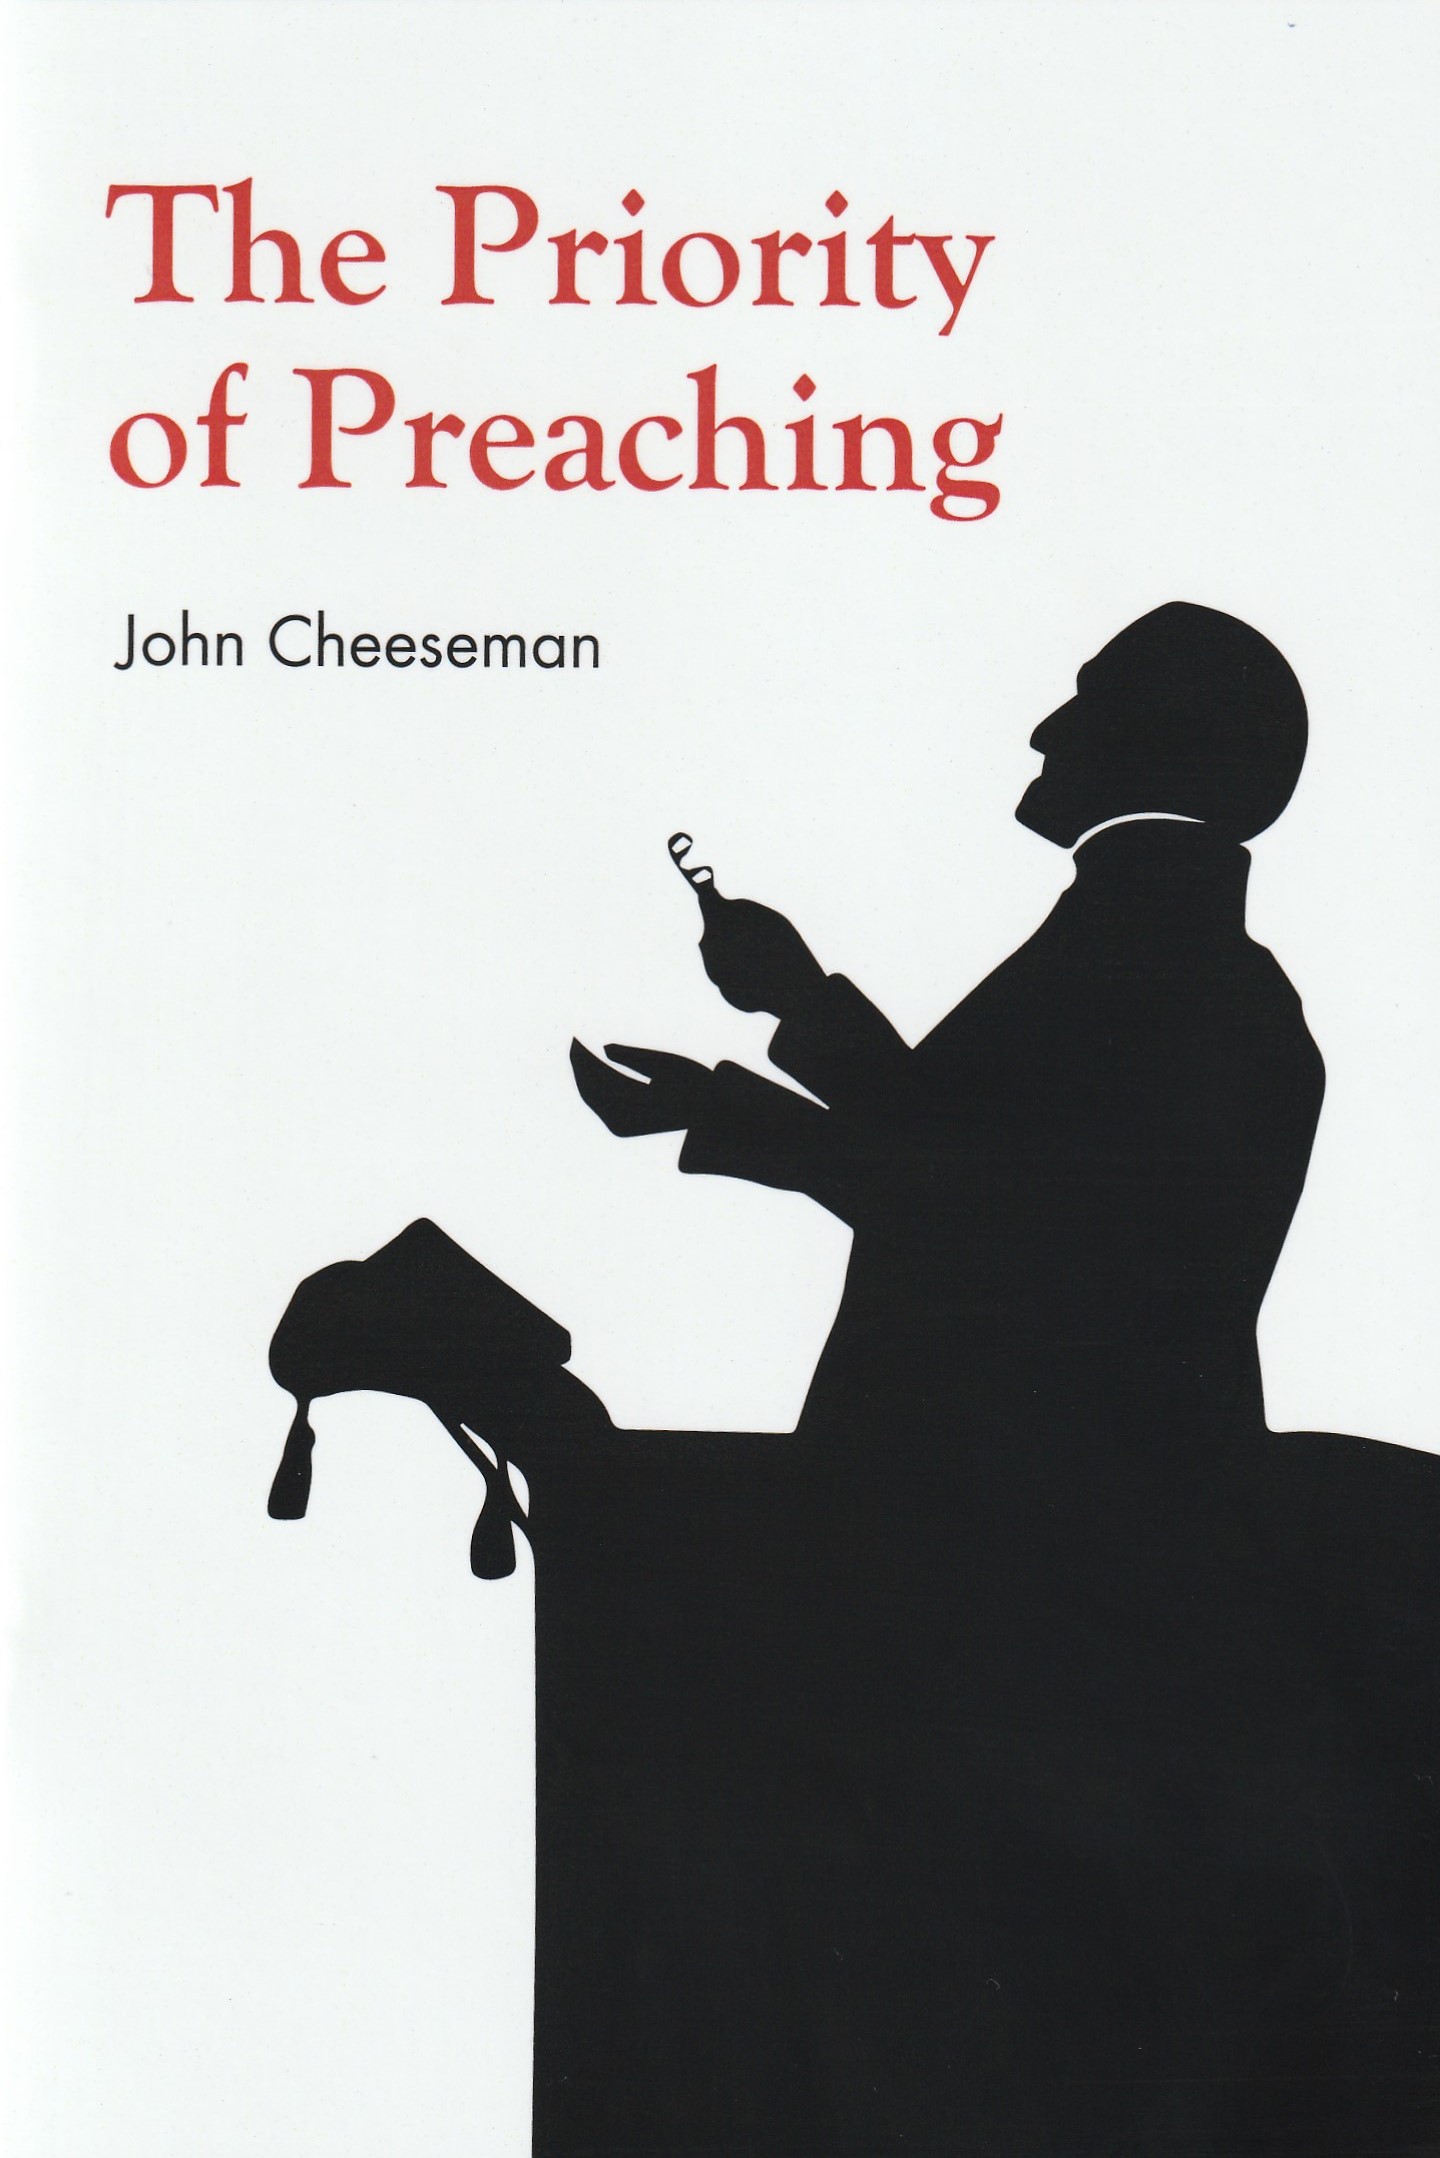 The Priority of Preaching